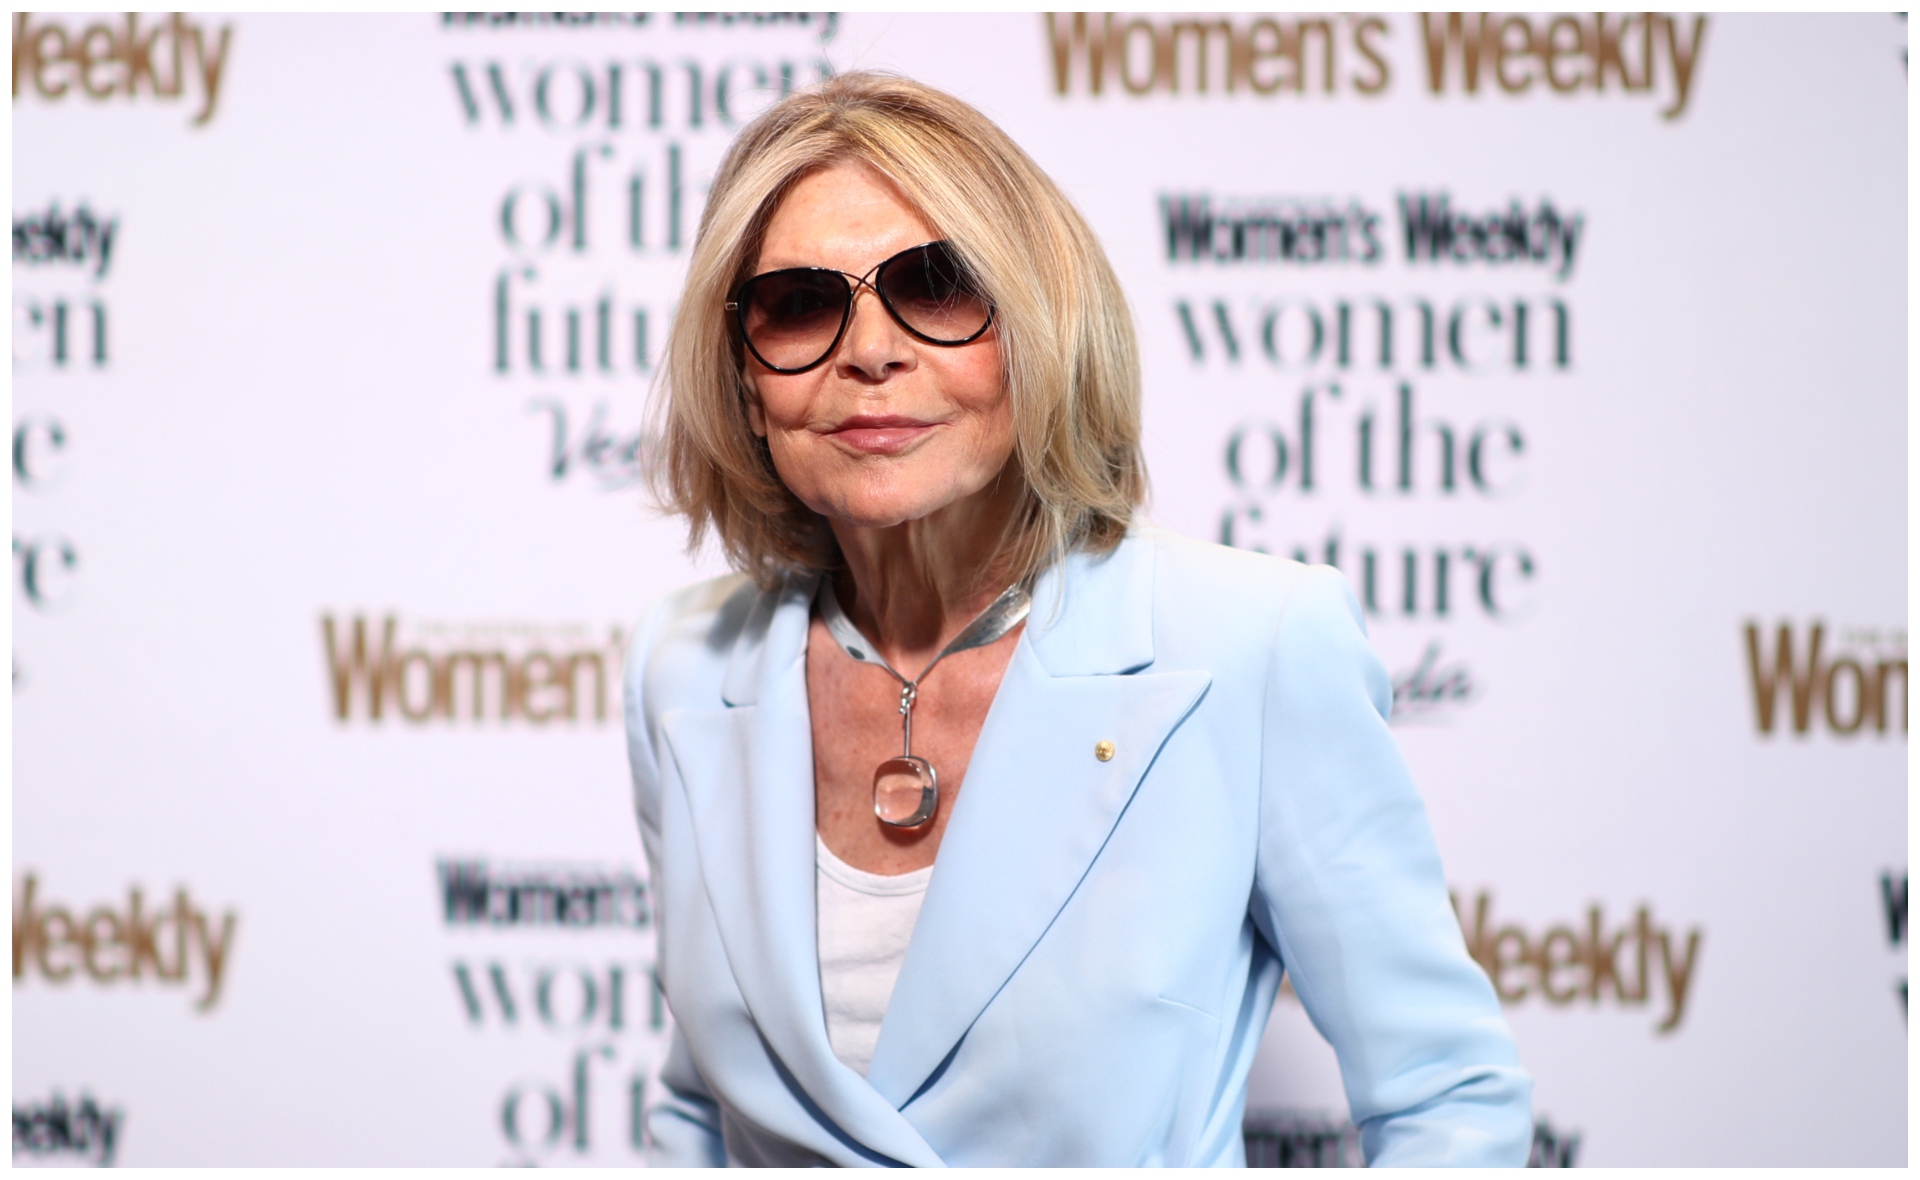 “An absolute champion of women, grace and elegance personified”: Tributes flow for Australian fashion legend Carla Zampatti following her tragic passing